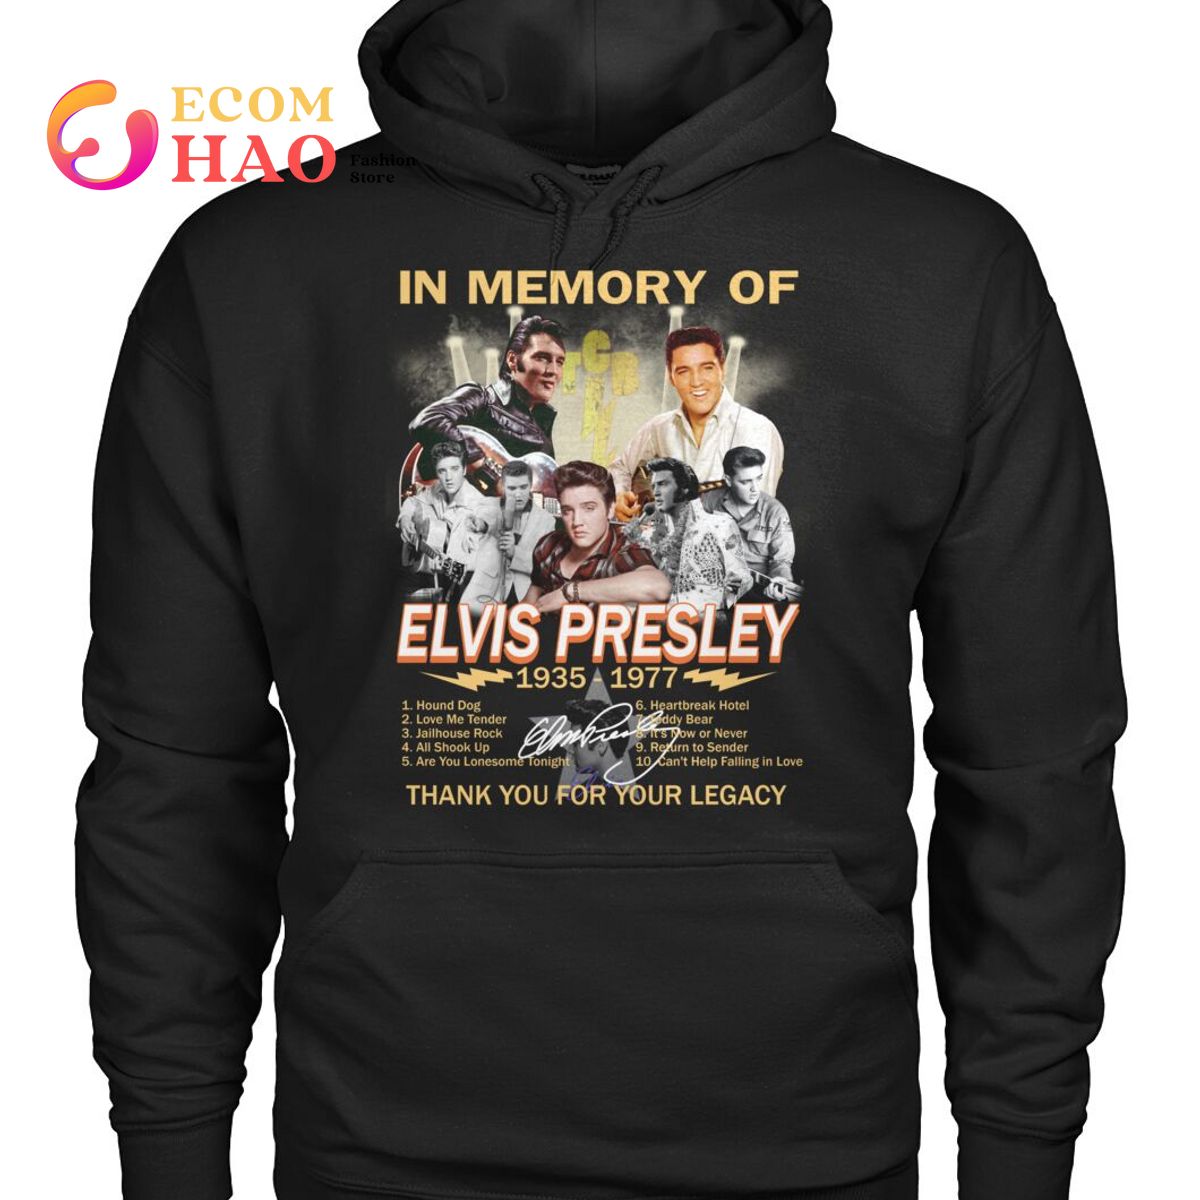 In Memory Of Elvis Presley 1935-1977 Thay You For Your Legacy T-Shirt